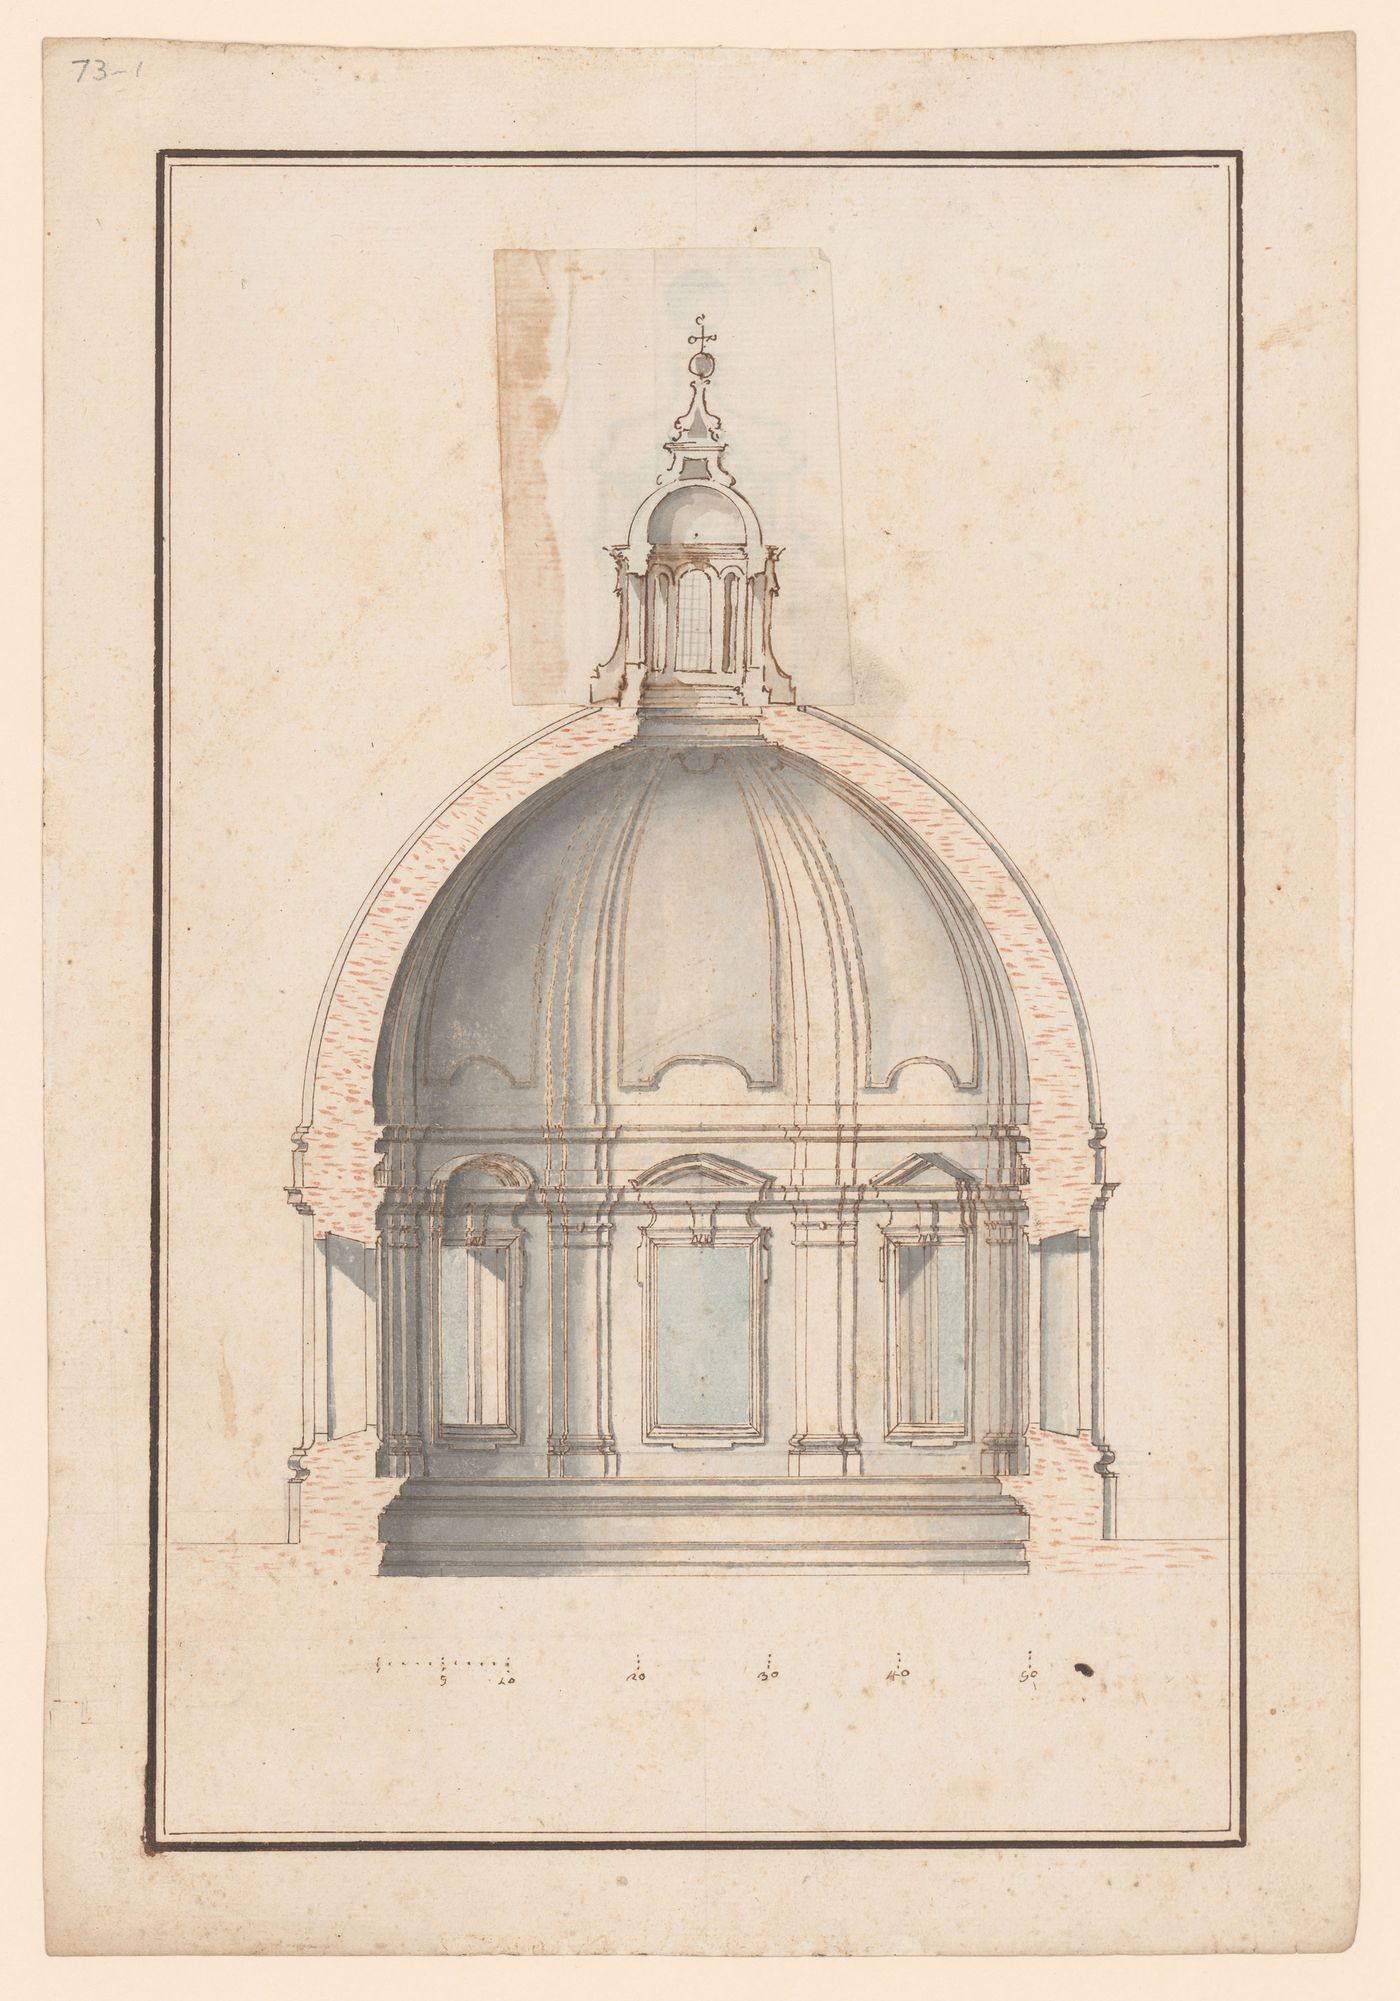 Section for a cupola, including an alternate design for the lantern